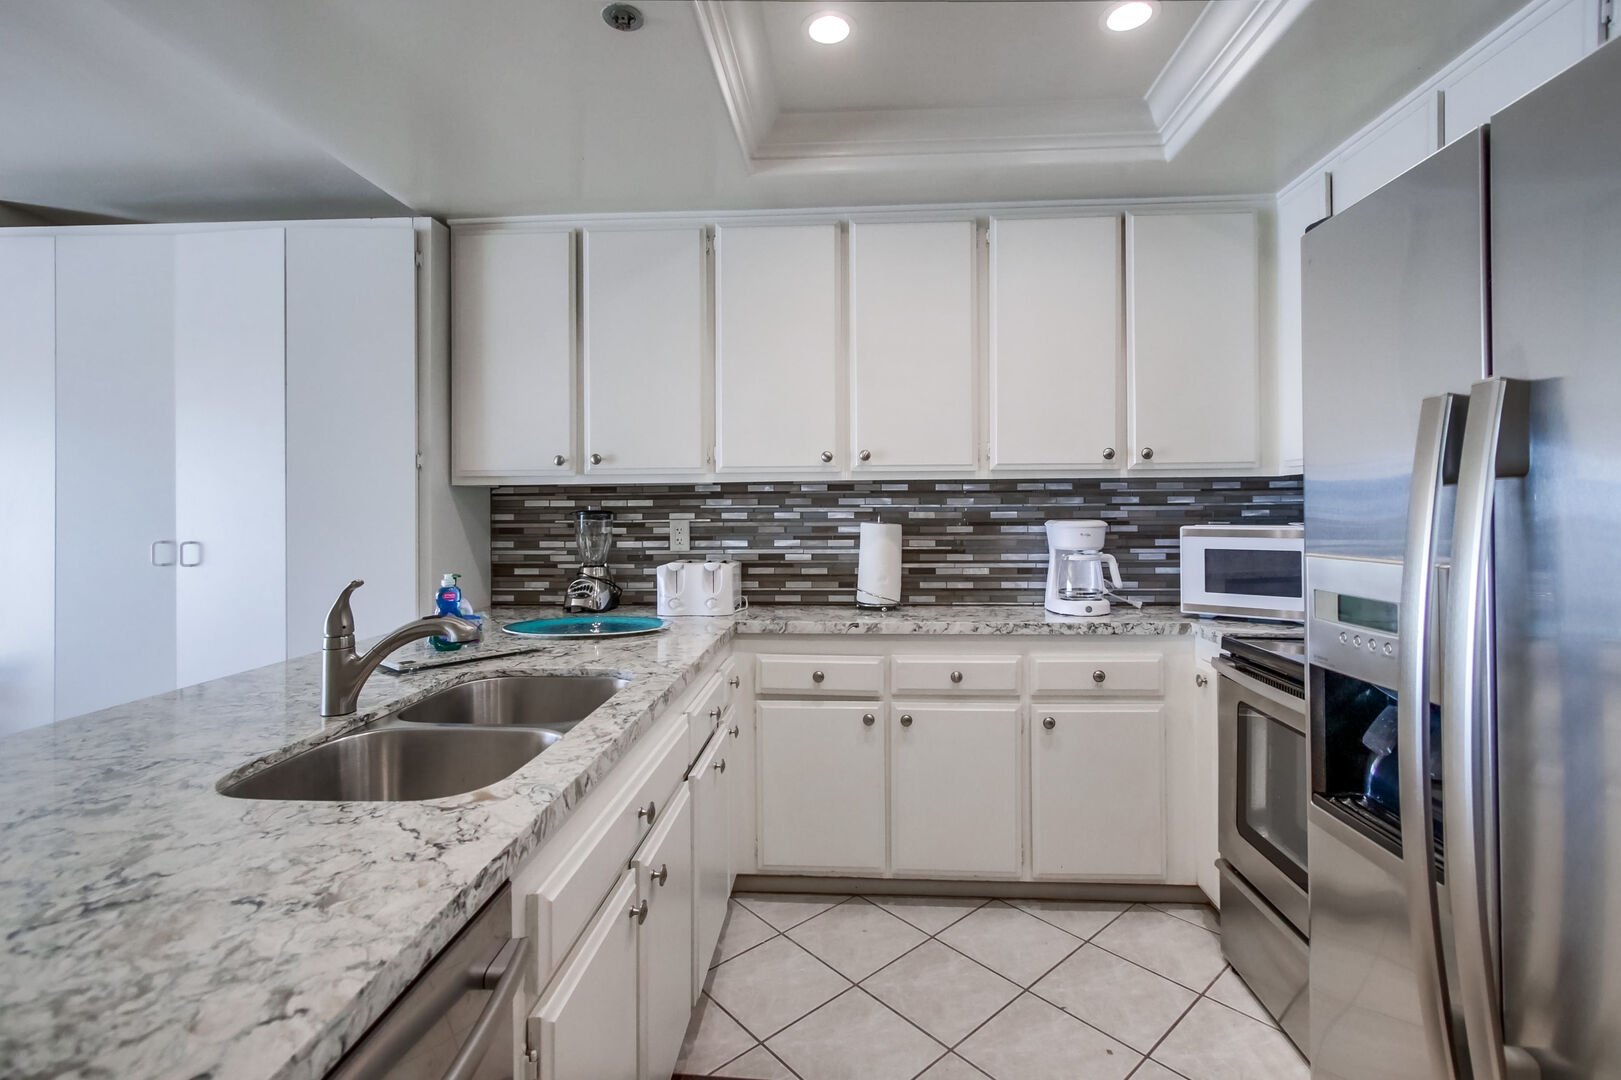 Kitchen with stainless steel appliances, dishwasher, refrigerator, freezer, stove, oven, microwave, sink and ample cabinet and drawer space